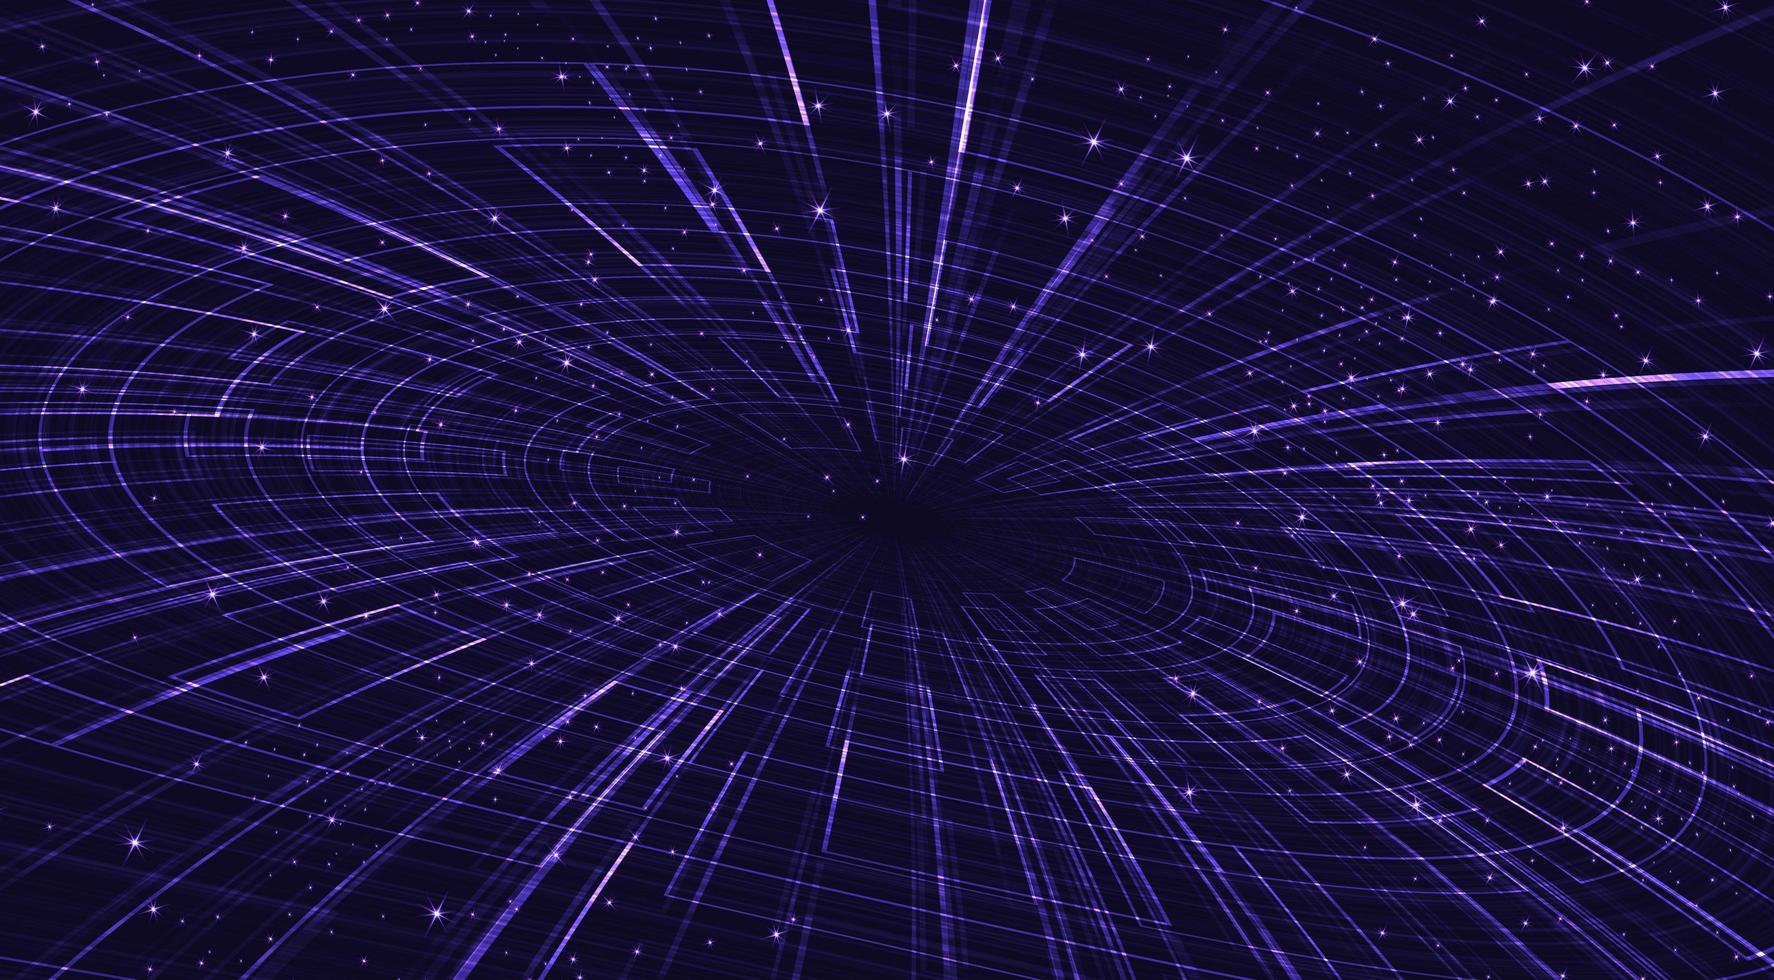 Ultra Violet Black Hole with Spiral Galaxy on Cosmic Background.planet and physics concept design,vector illustration. vector